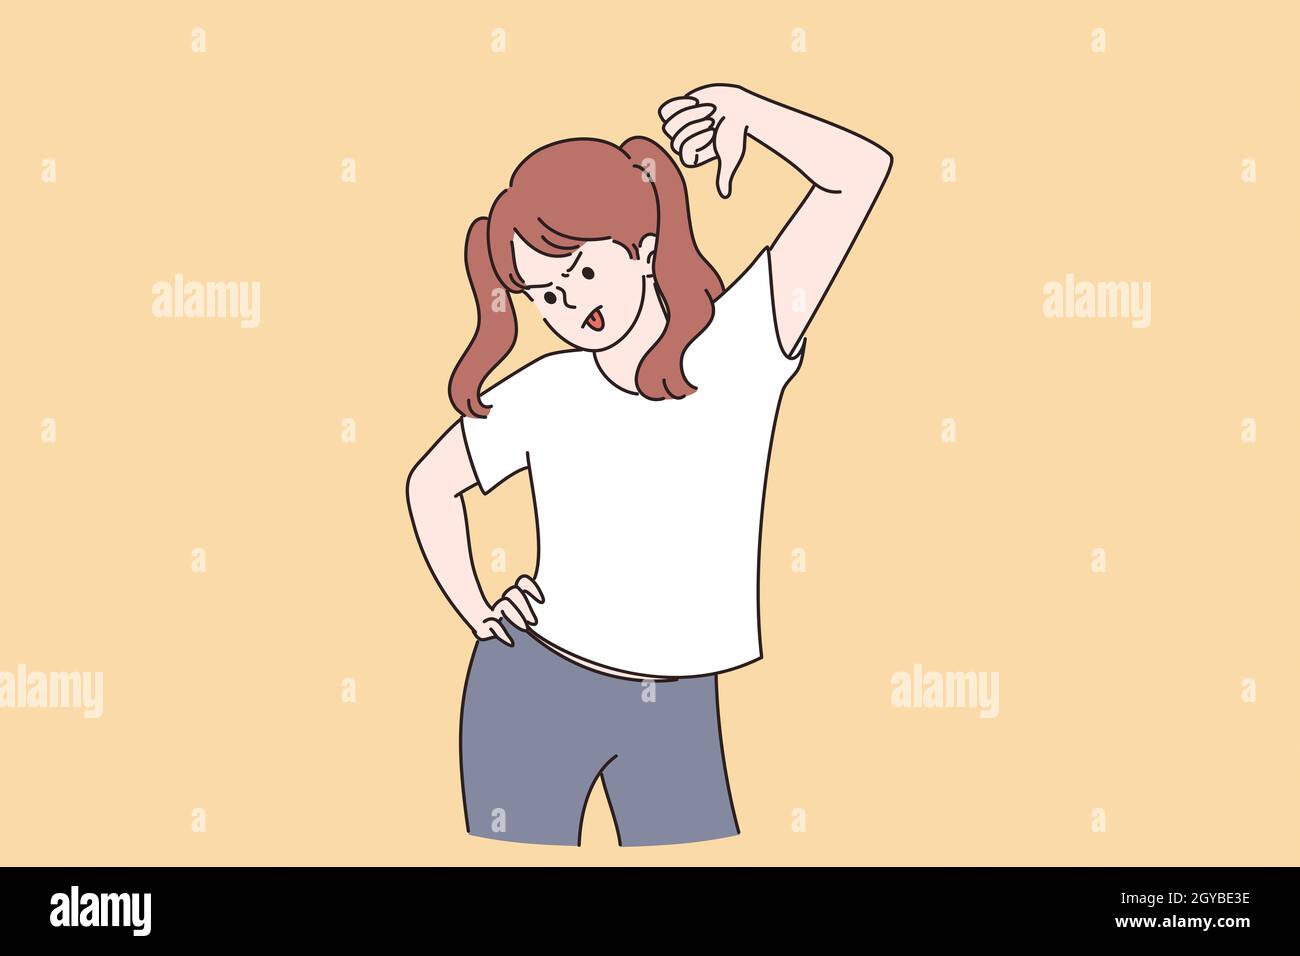 Thumbs down and negative expression concept. Young dissatisfied girl teen cartoon character standing showing thumbs down sign with fingers feeling ang Stock Photo